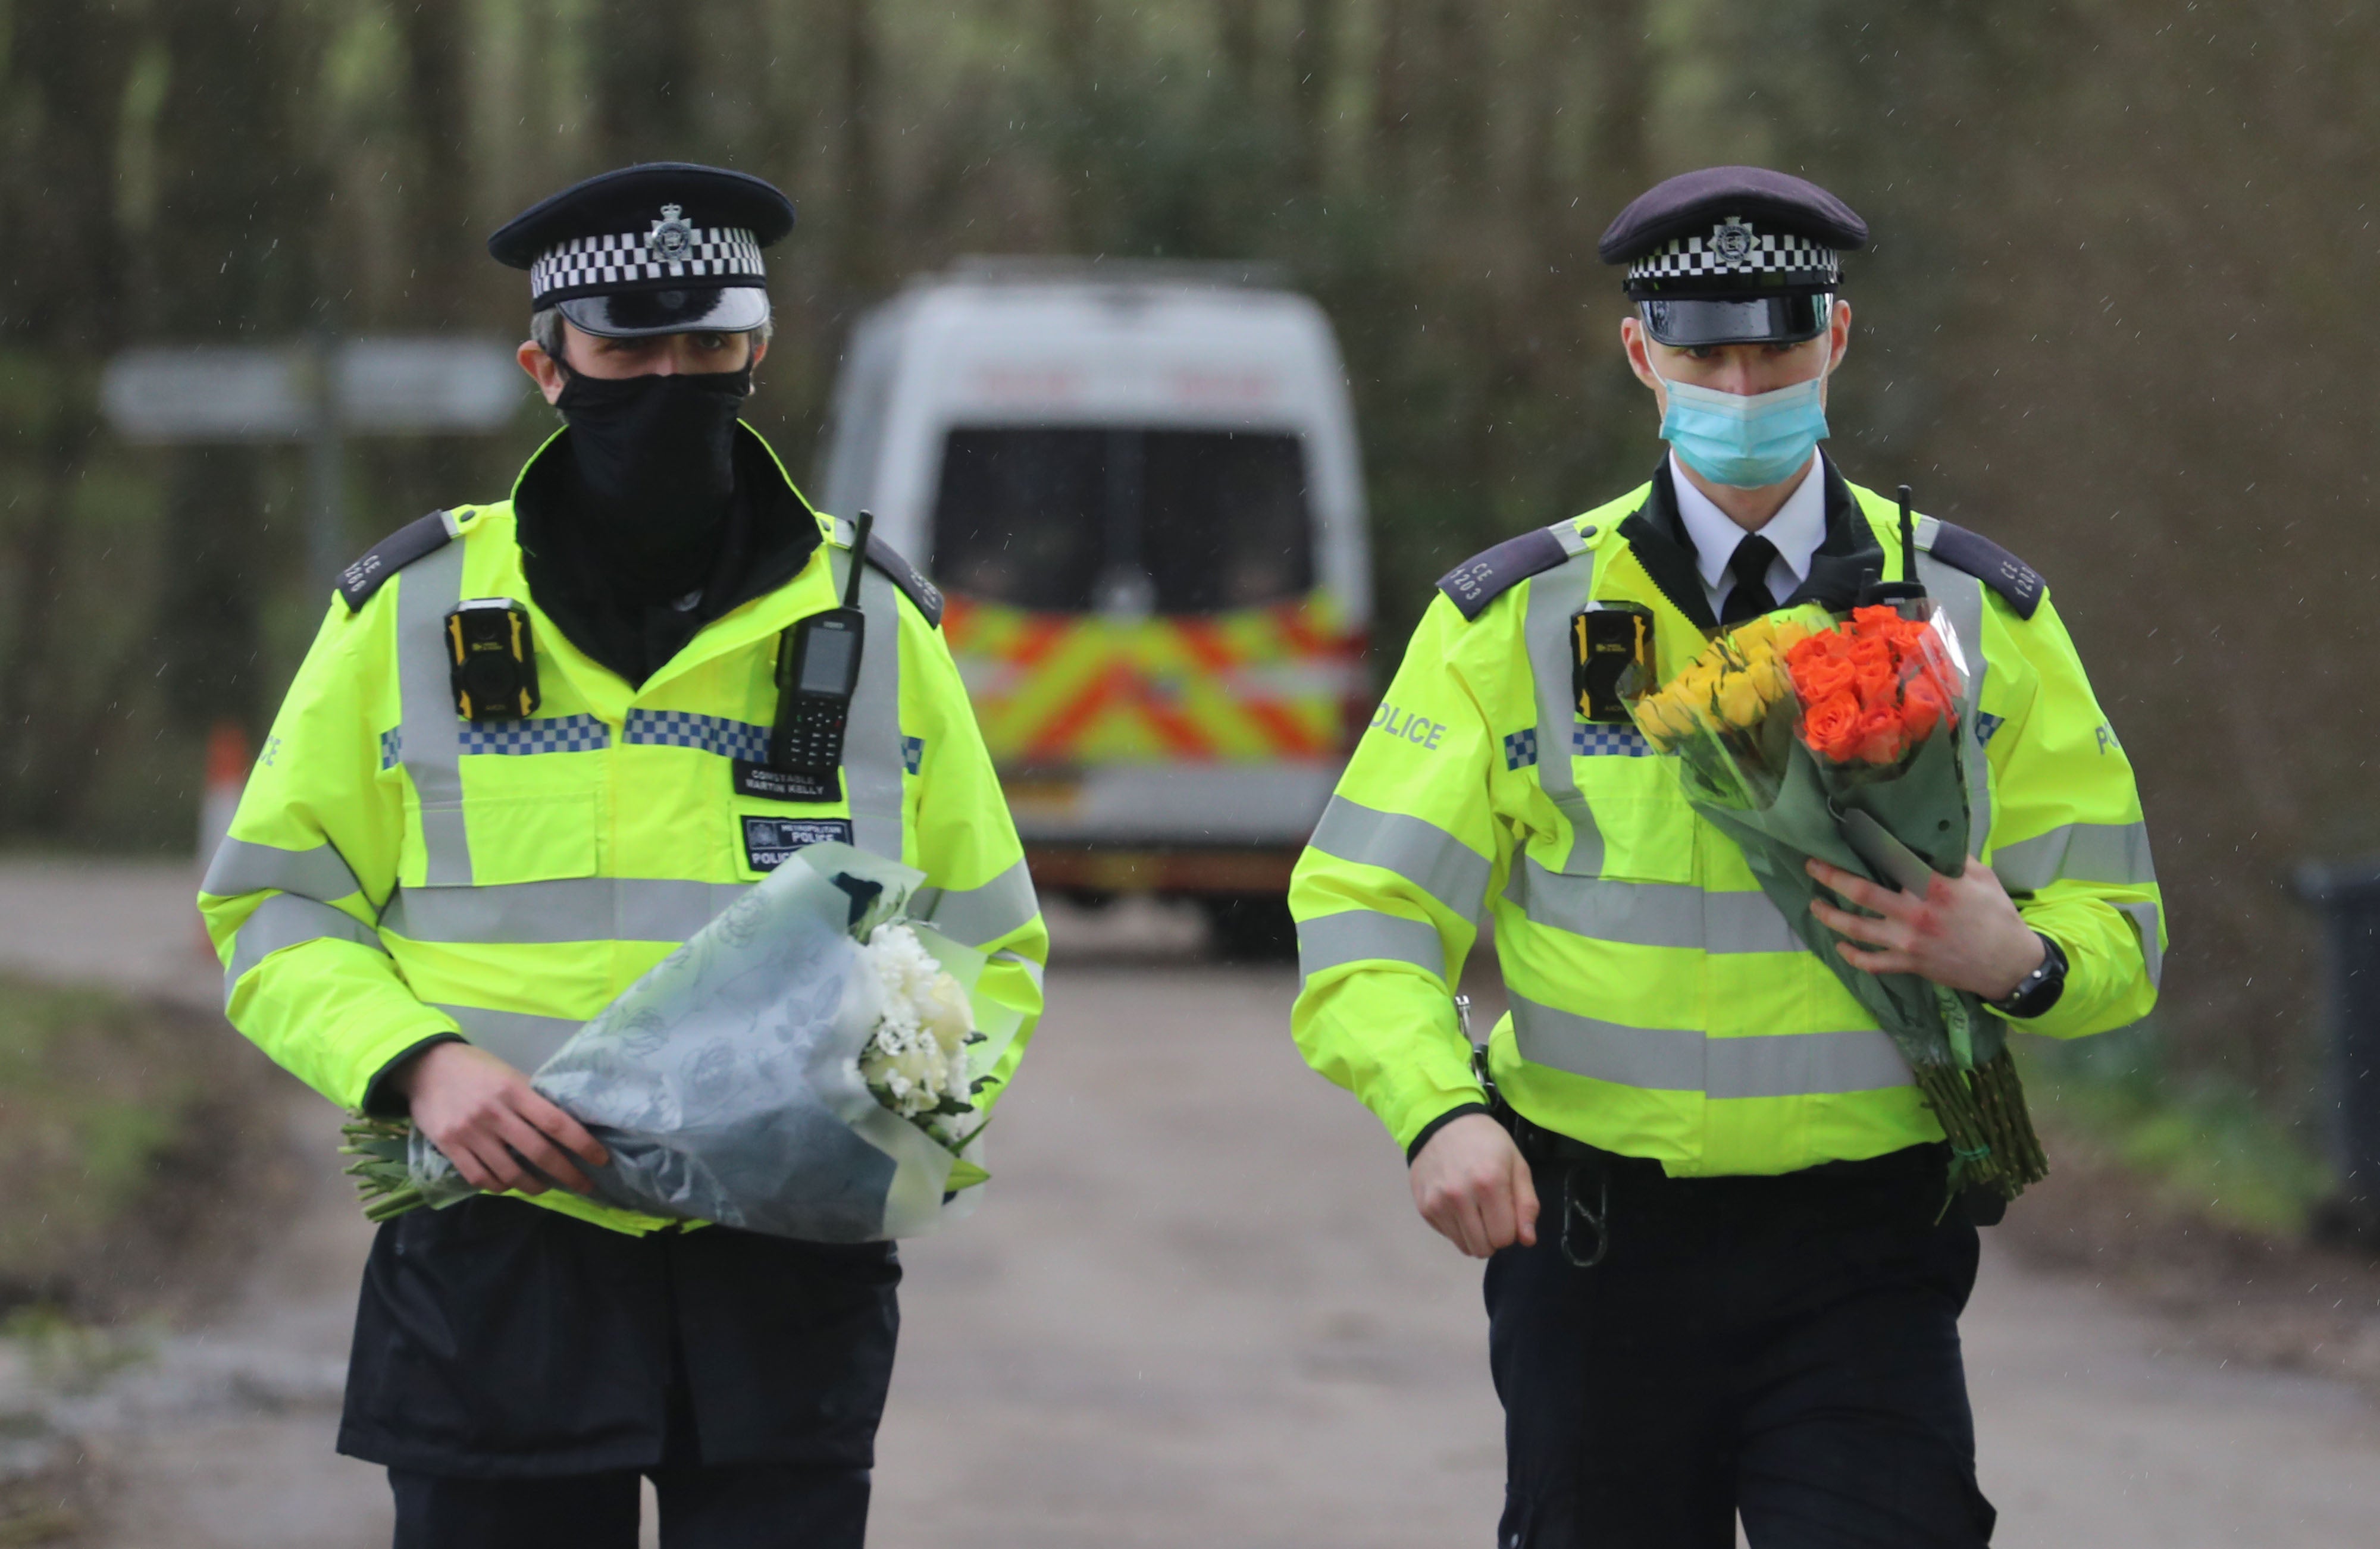 Police officers carry flowers from the public after remains were found in the search for Sarah Everard